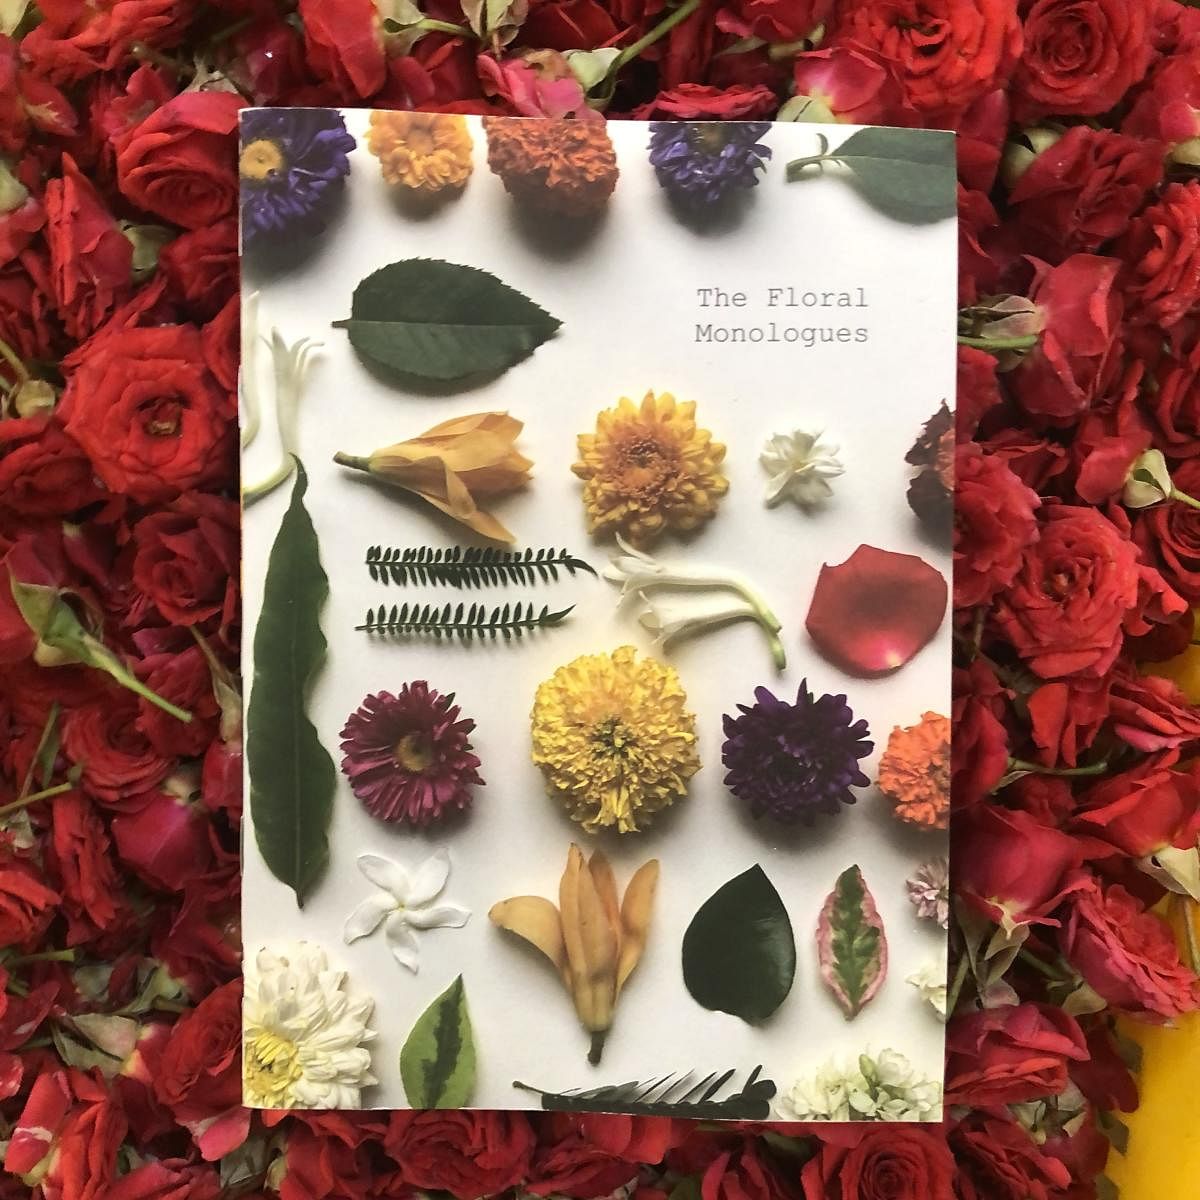 Zine to poetry: Activities for flower lovers this weekend